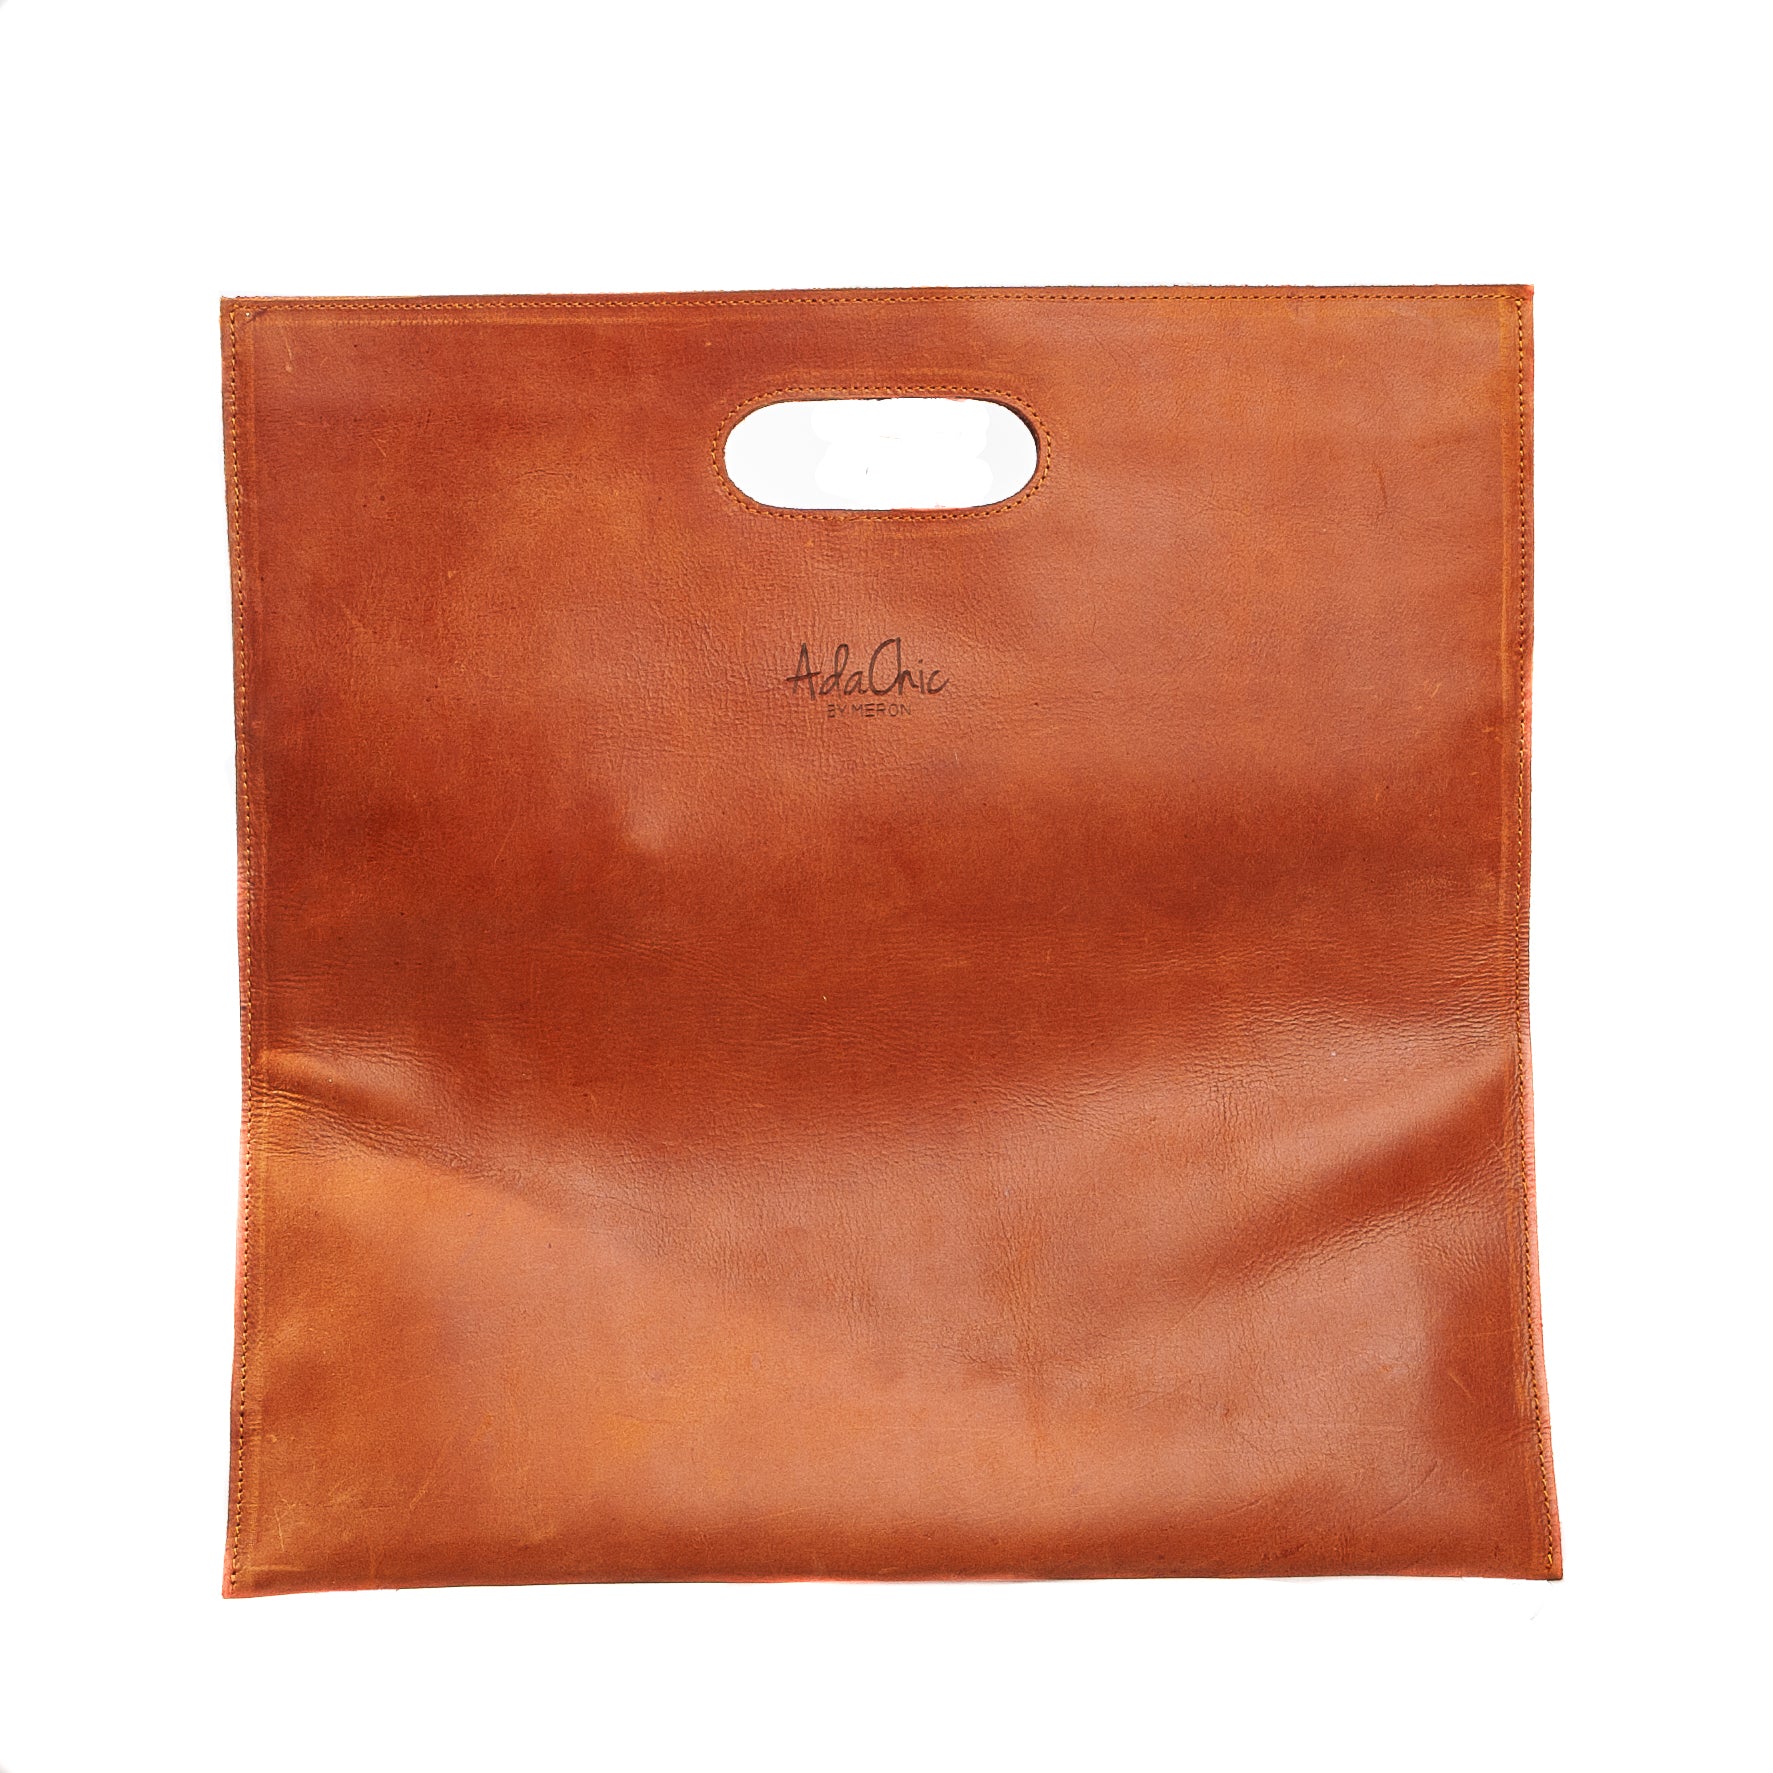 Gifti Fold Over Leather Clutch/Handbag with Top Handle (Rich Tan)